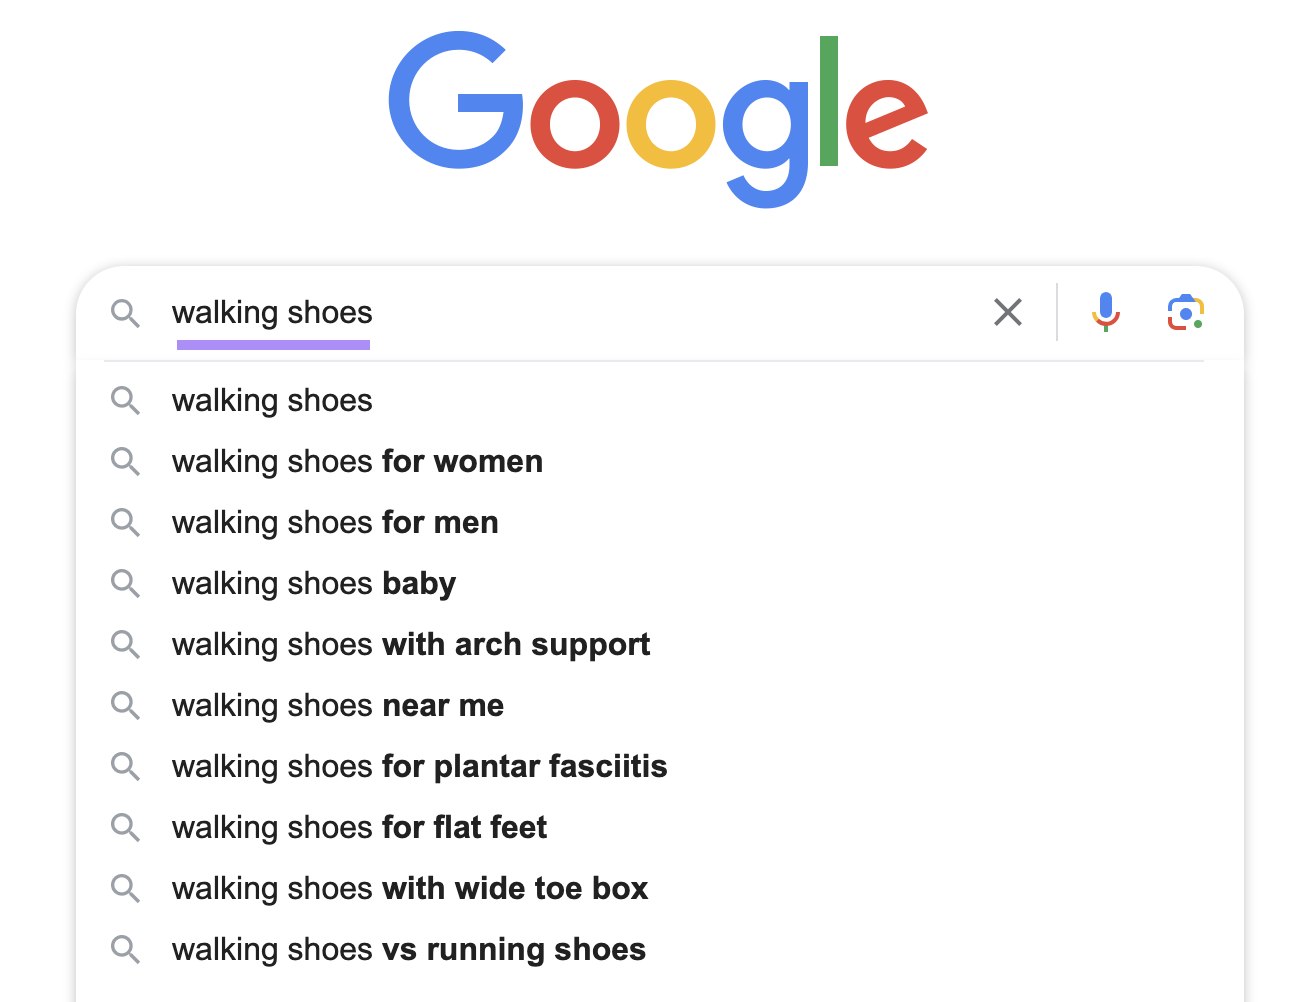 Google autocomplete suggestions when typing “walking shoes” into the search